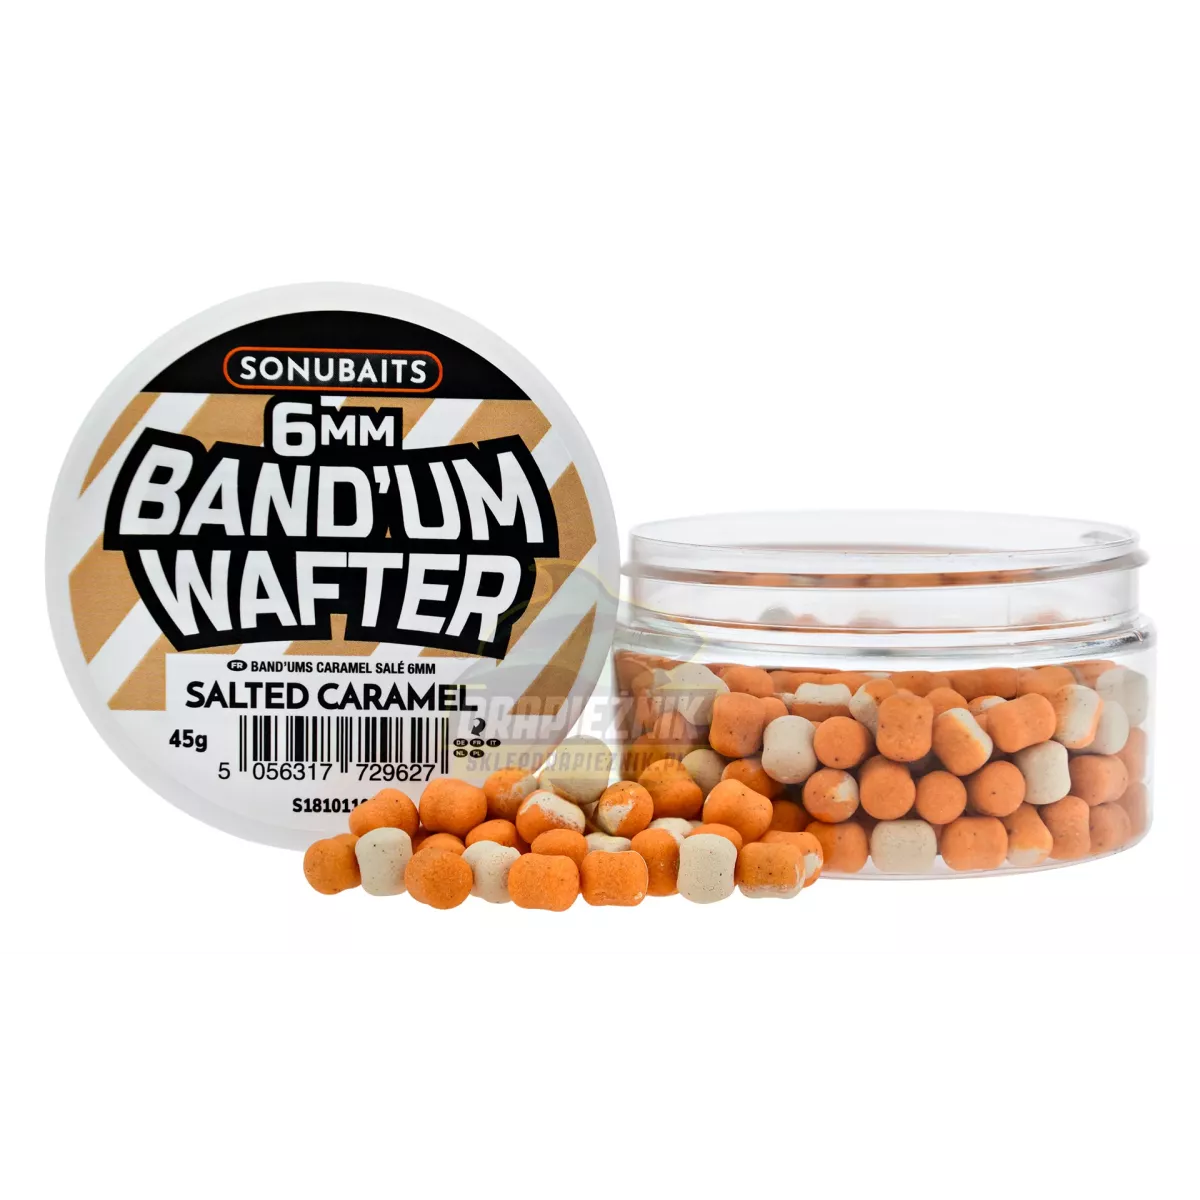 S1810110 Sonubaits Band'Um Wafters 6mm - Salted Caramel